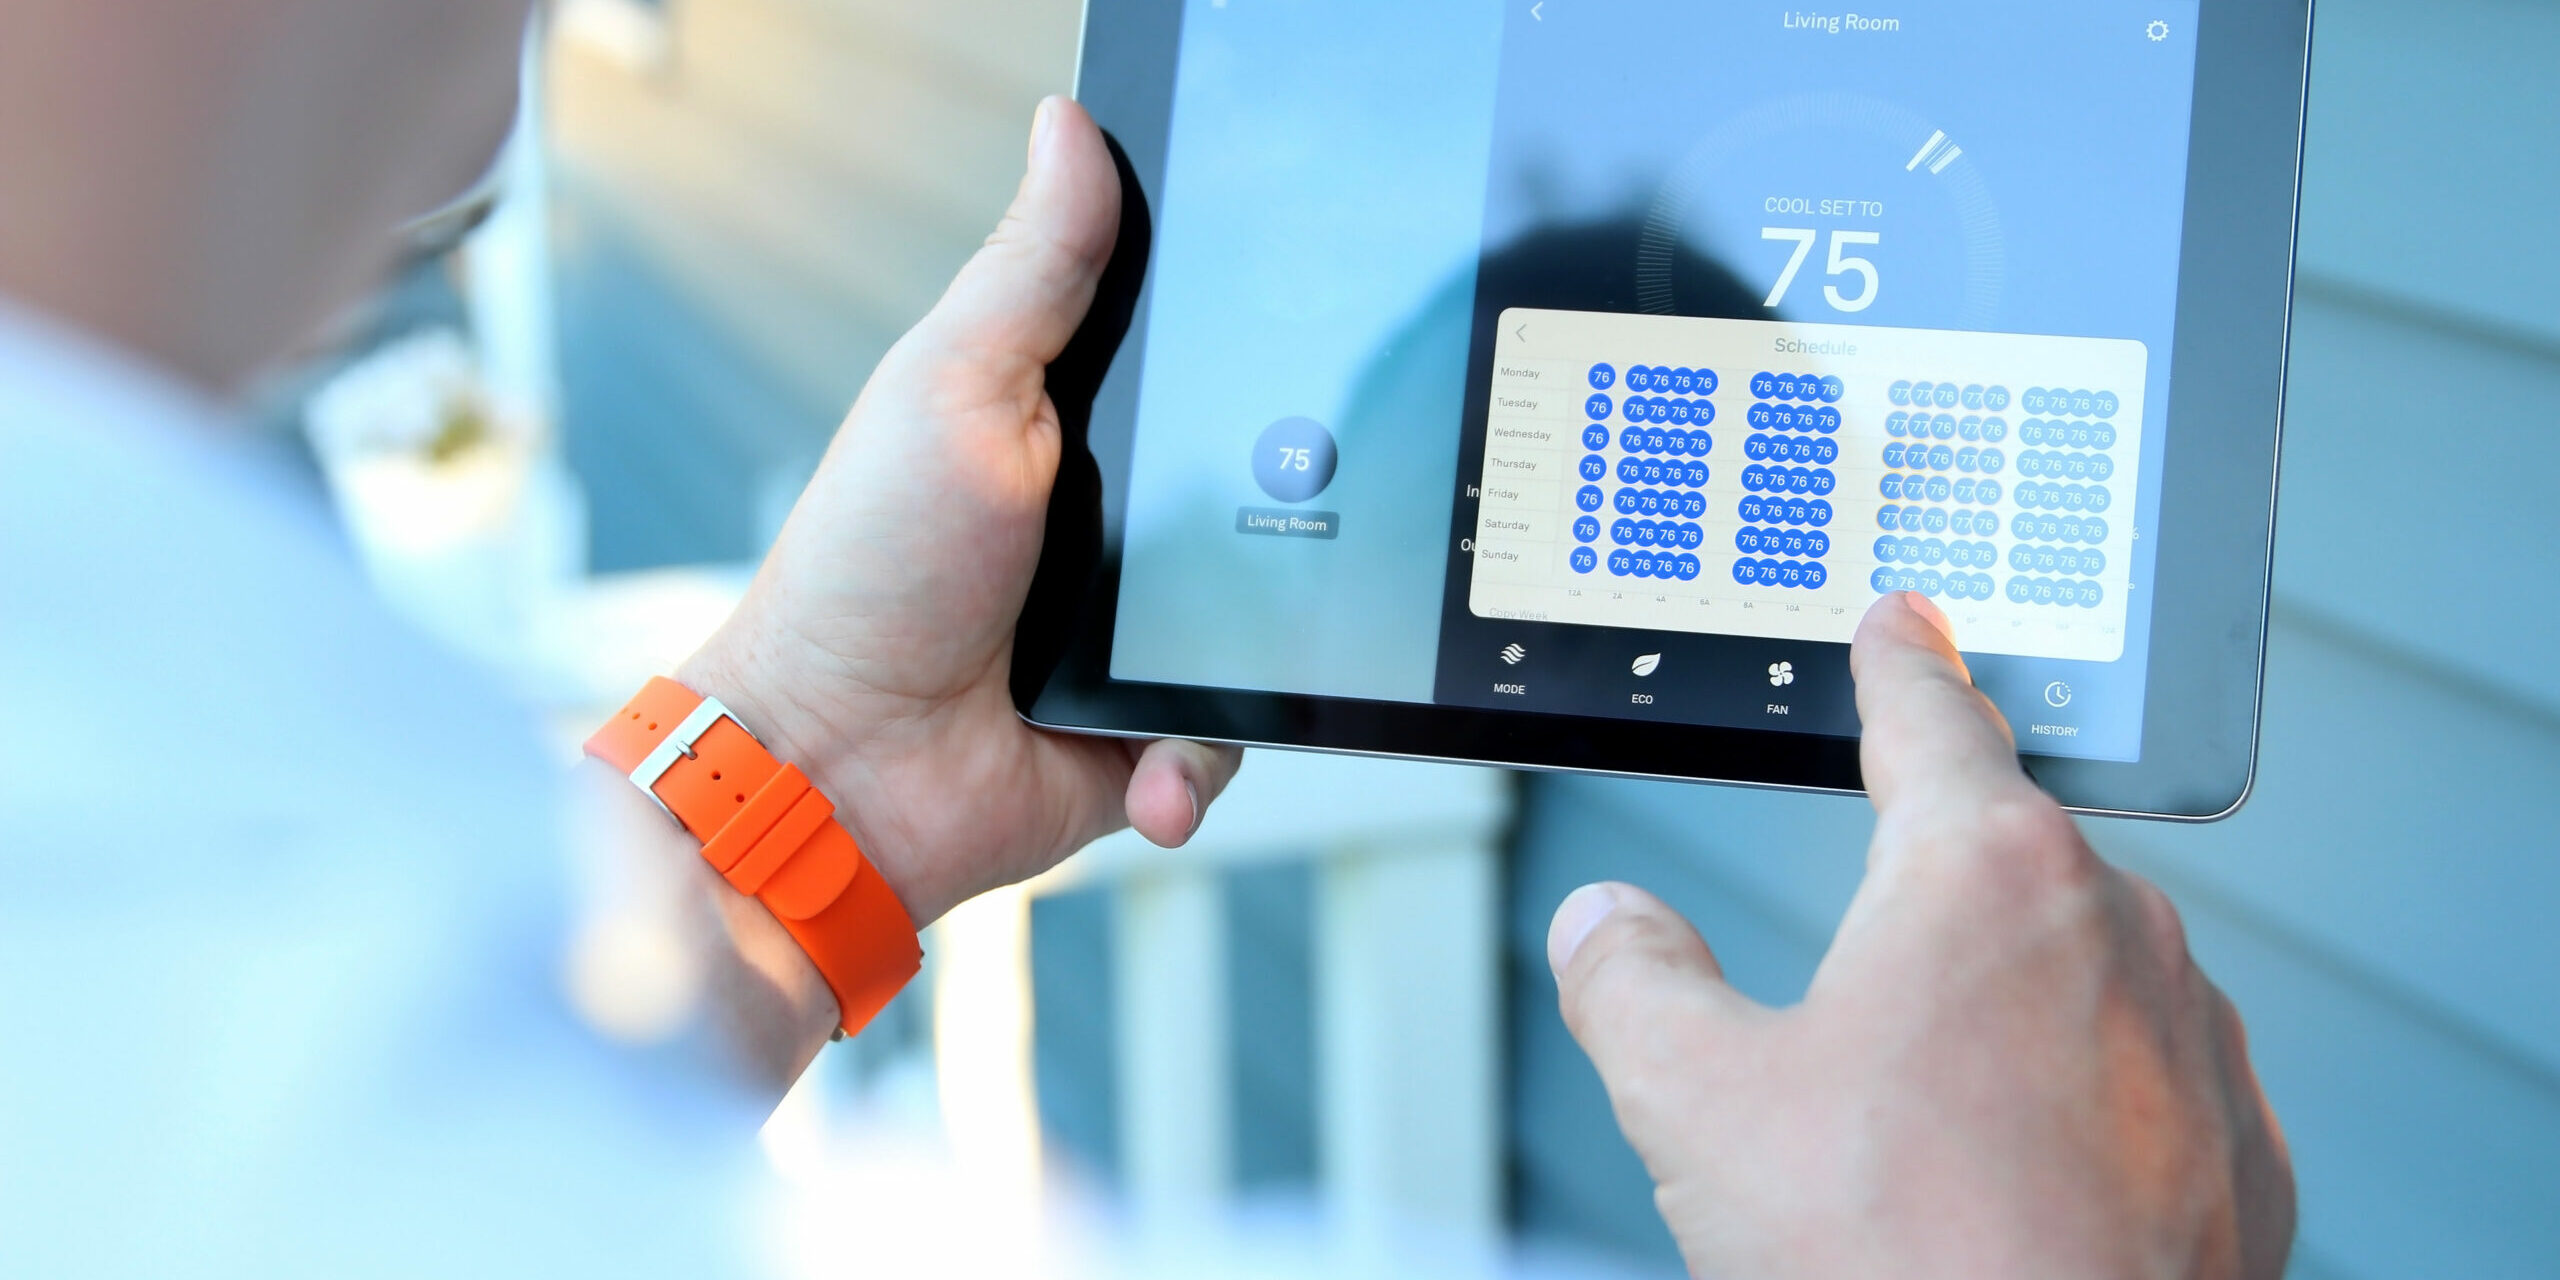 Man is Adjusting a temperature using a tablet with smart home app